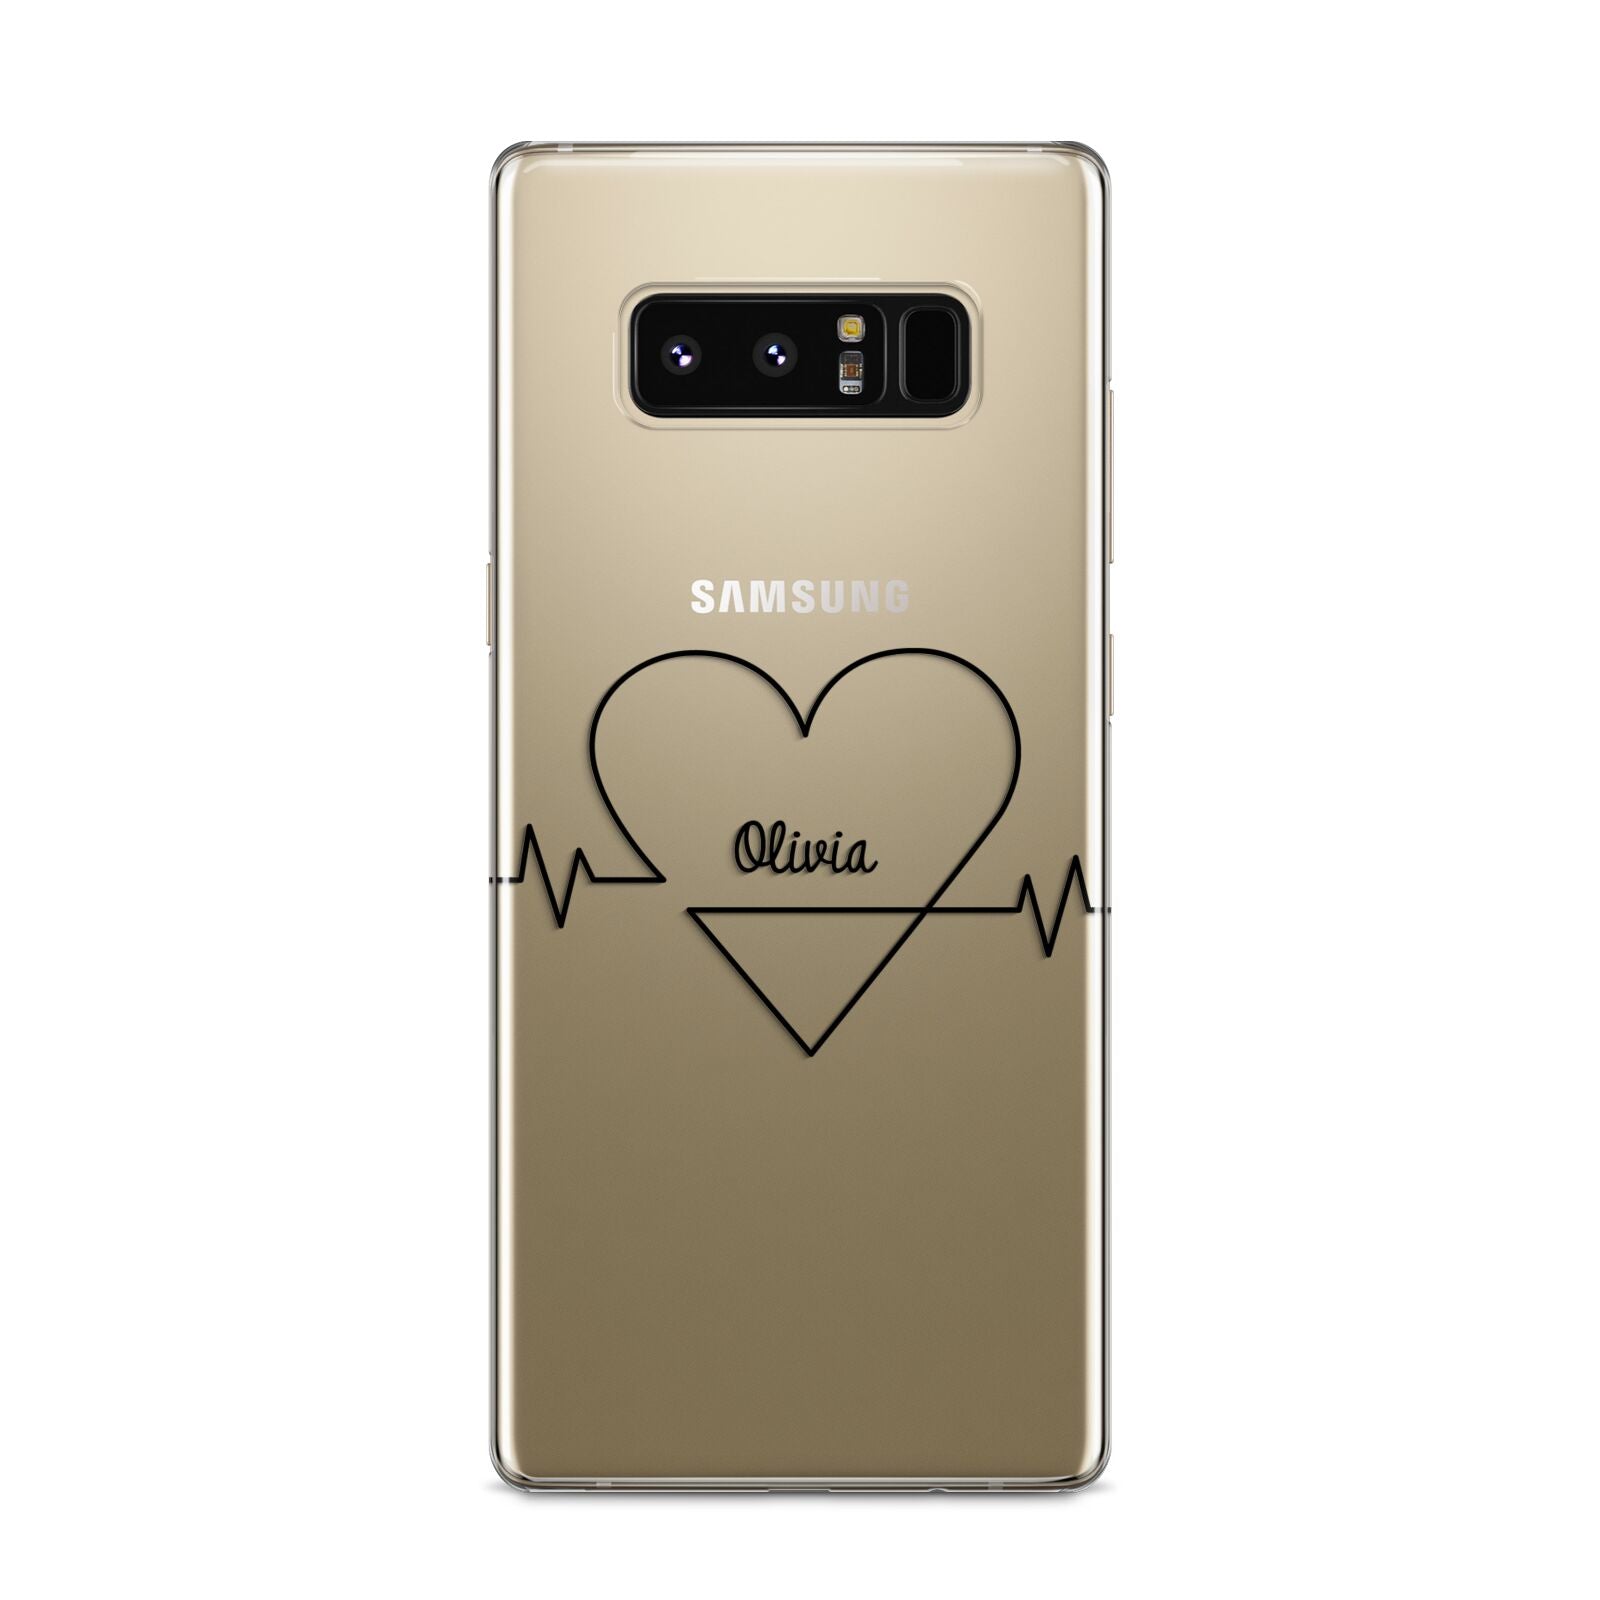 ECG Effect Heart Beats with Name Samsung Galaxy S8 Case